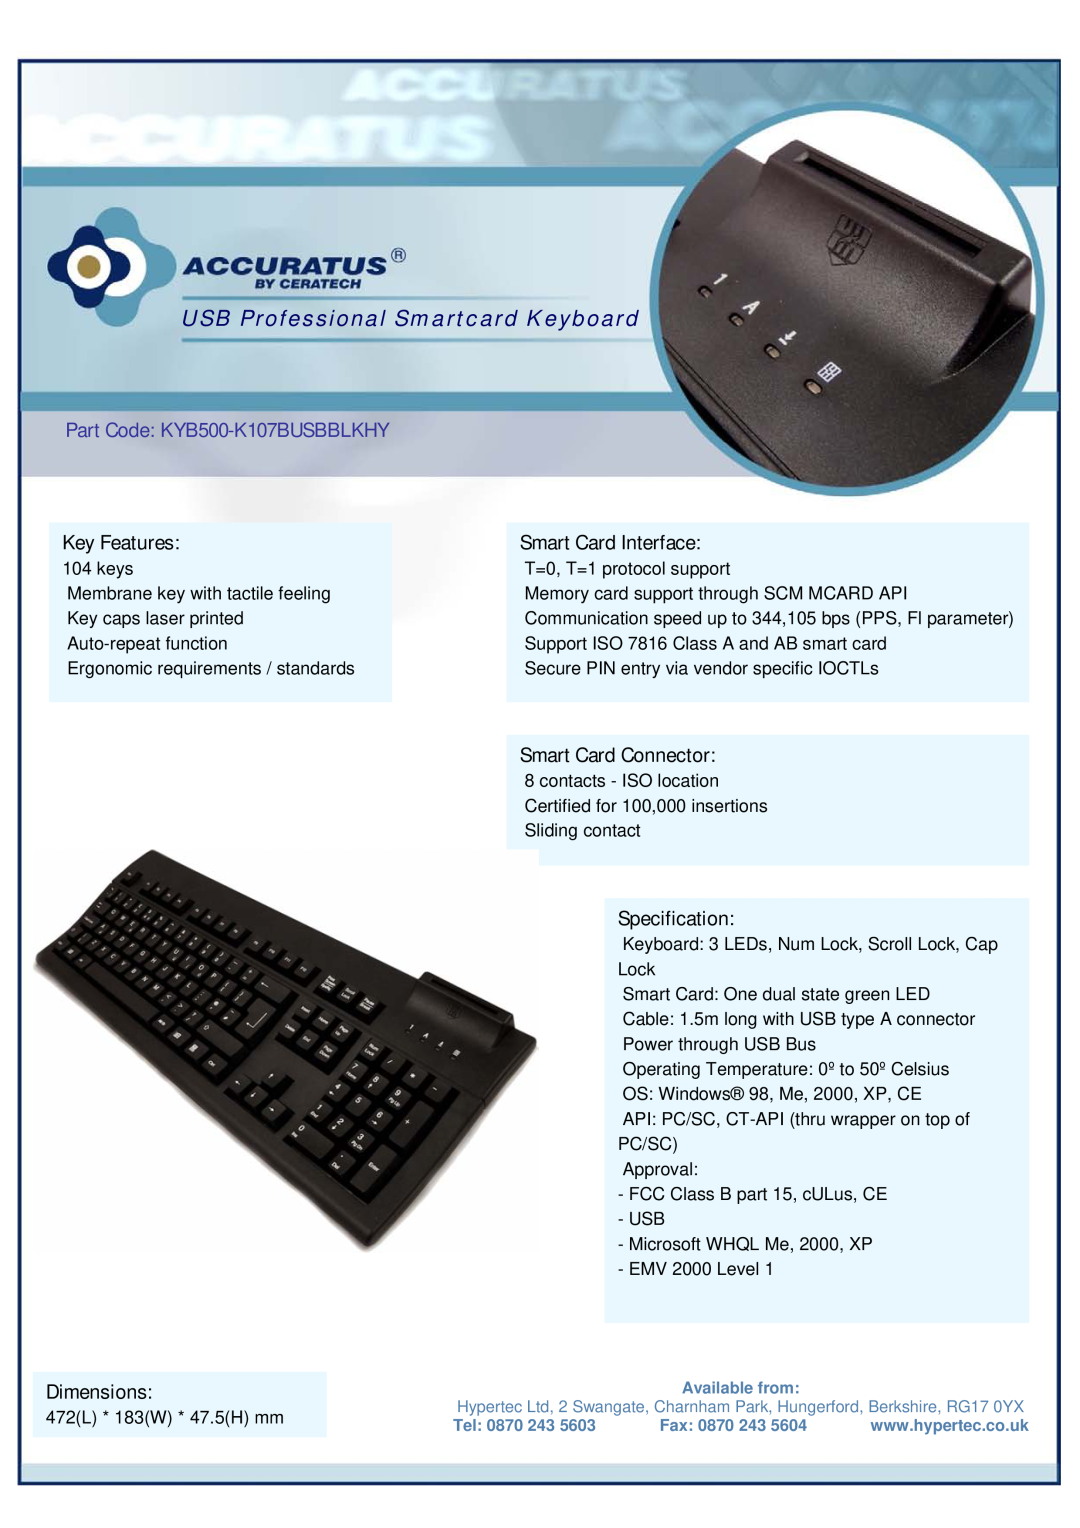 Hypertec dimensions USB Professional Smartcard Keyboard, Part Code KYB500-K107BUSBBLKHY, Key Features, Specification 